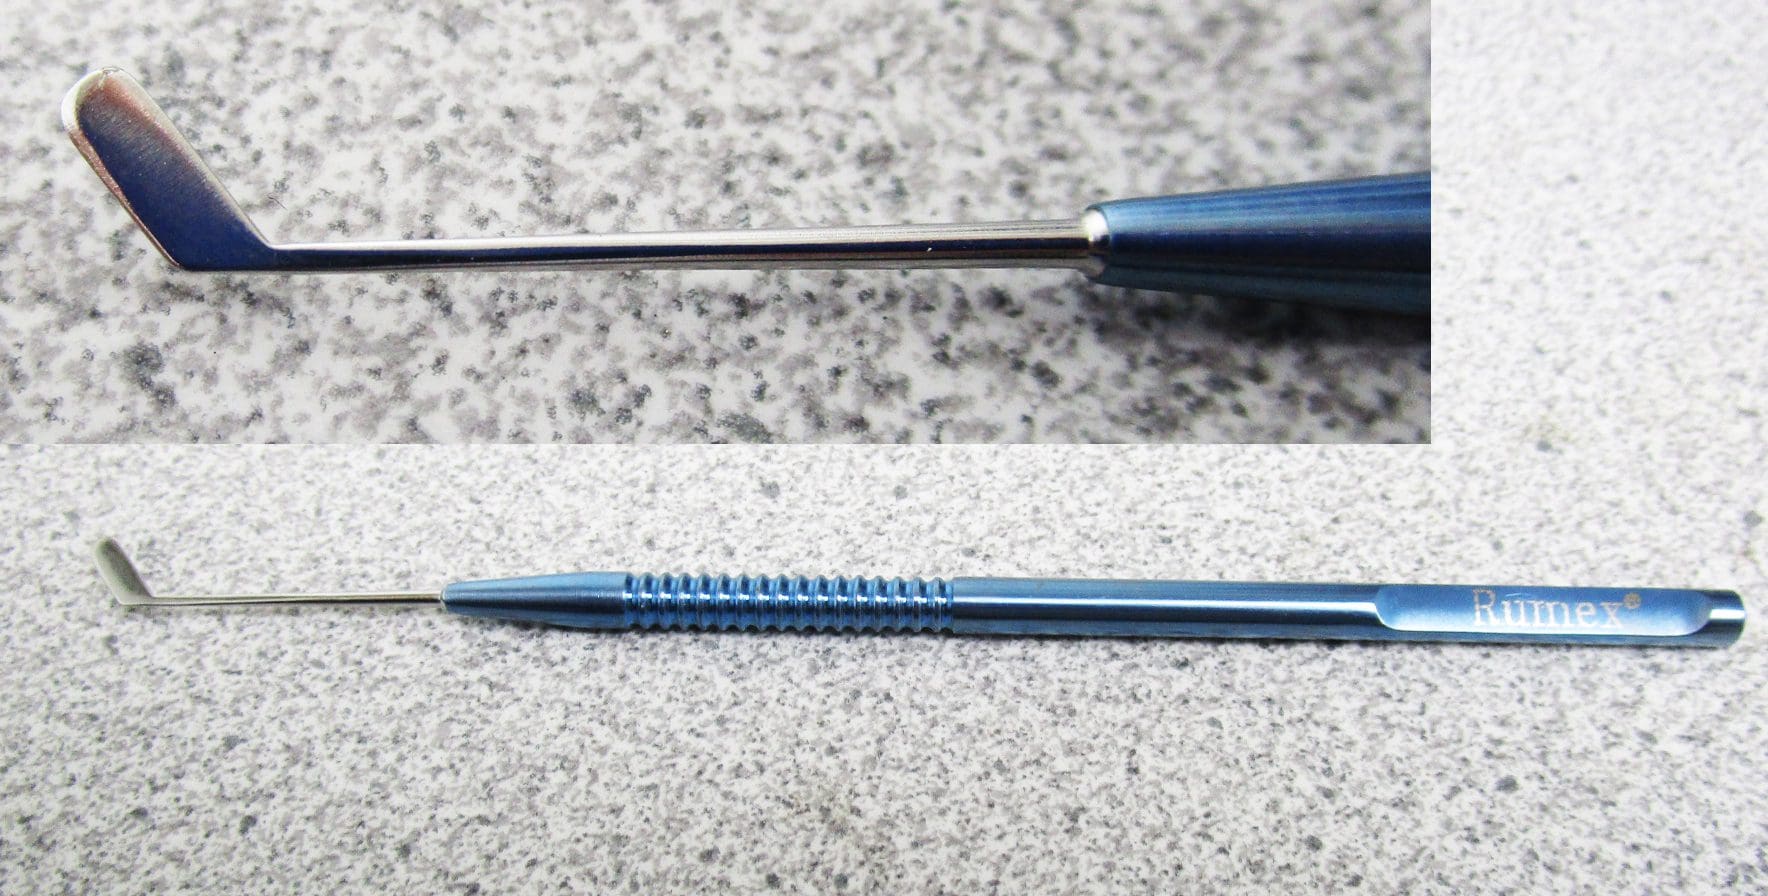 A close up of two different pens on the ground